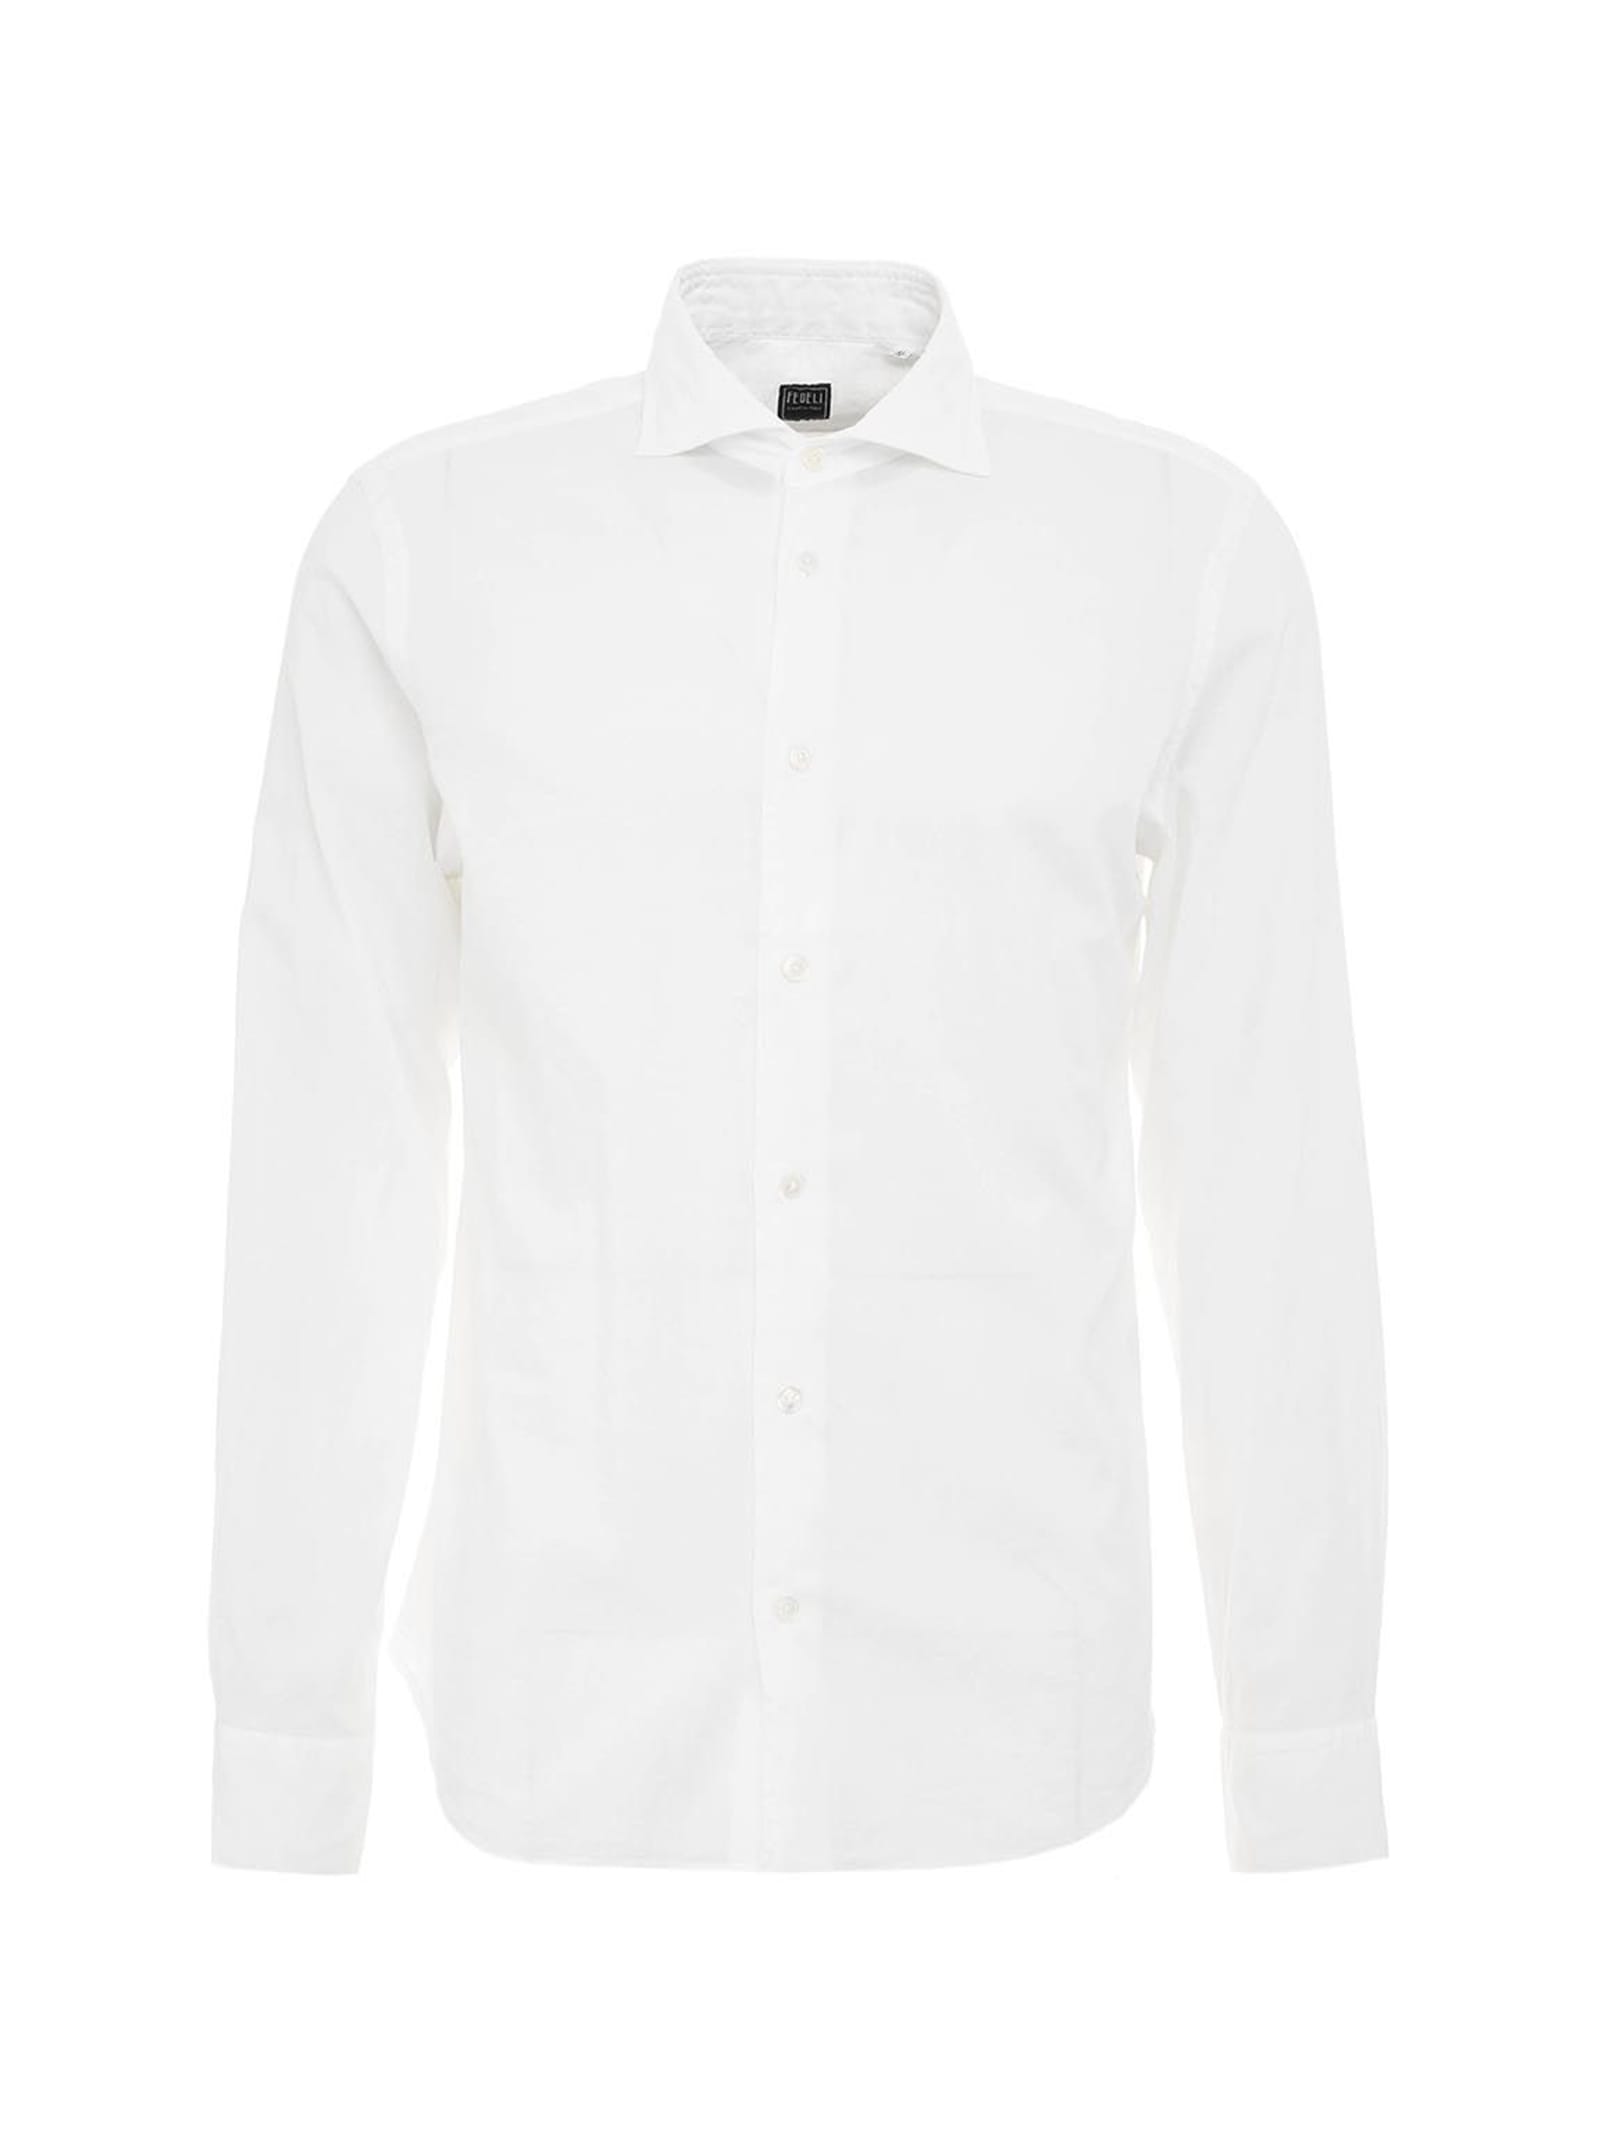 FEDELI SEAN SHIRT IN THE LIGHTEST PANAMINO VOILE COTTON